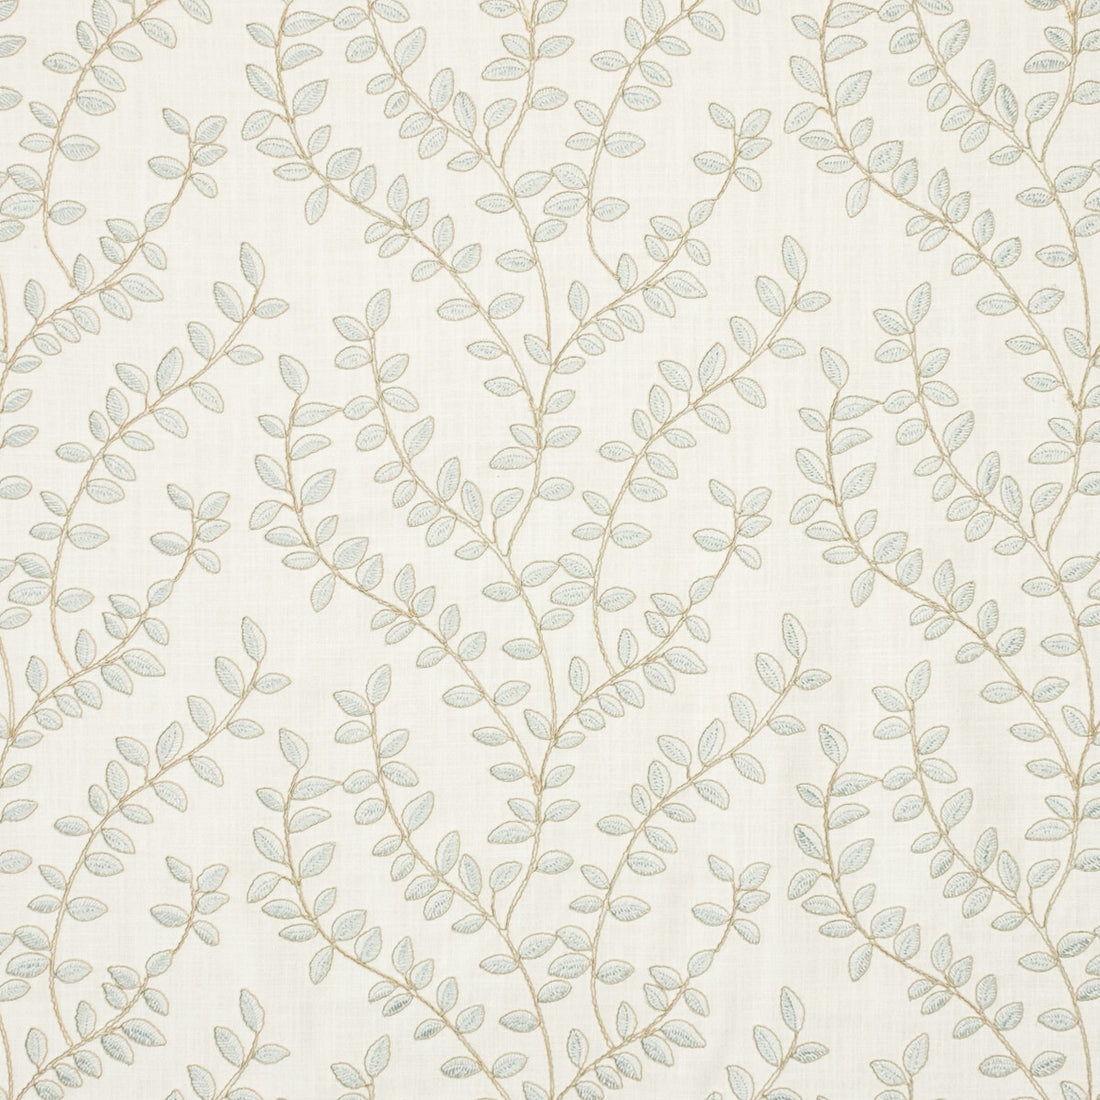 Kravet Basics fabric in 35792-15 color - pattern 35792.15.0 - by Kravet Basics in the Modern Embroideries III collection